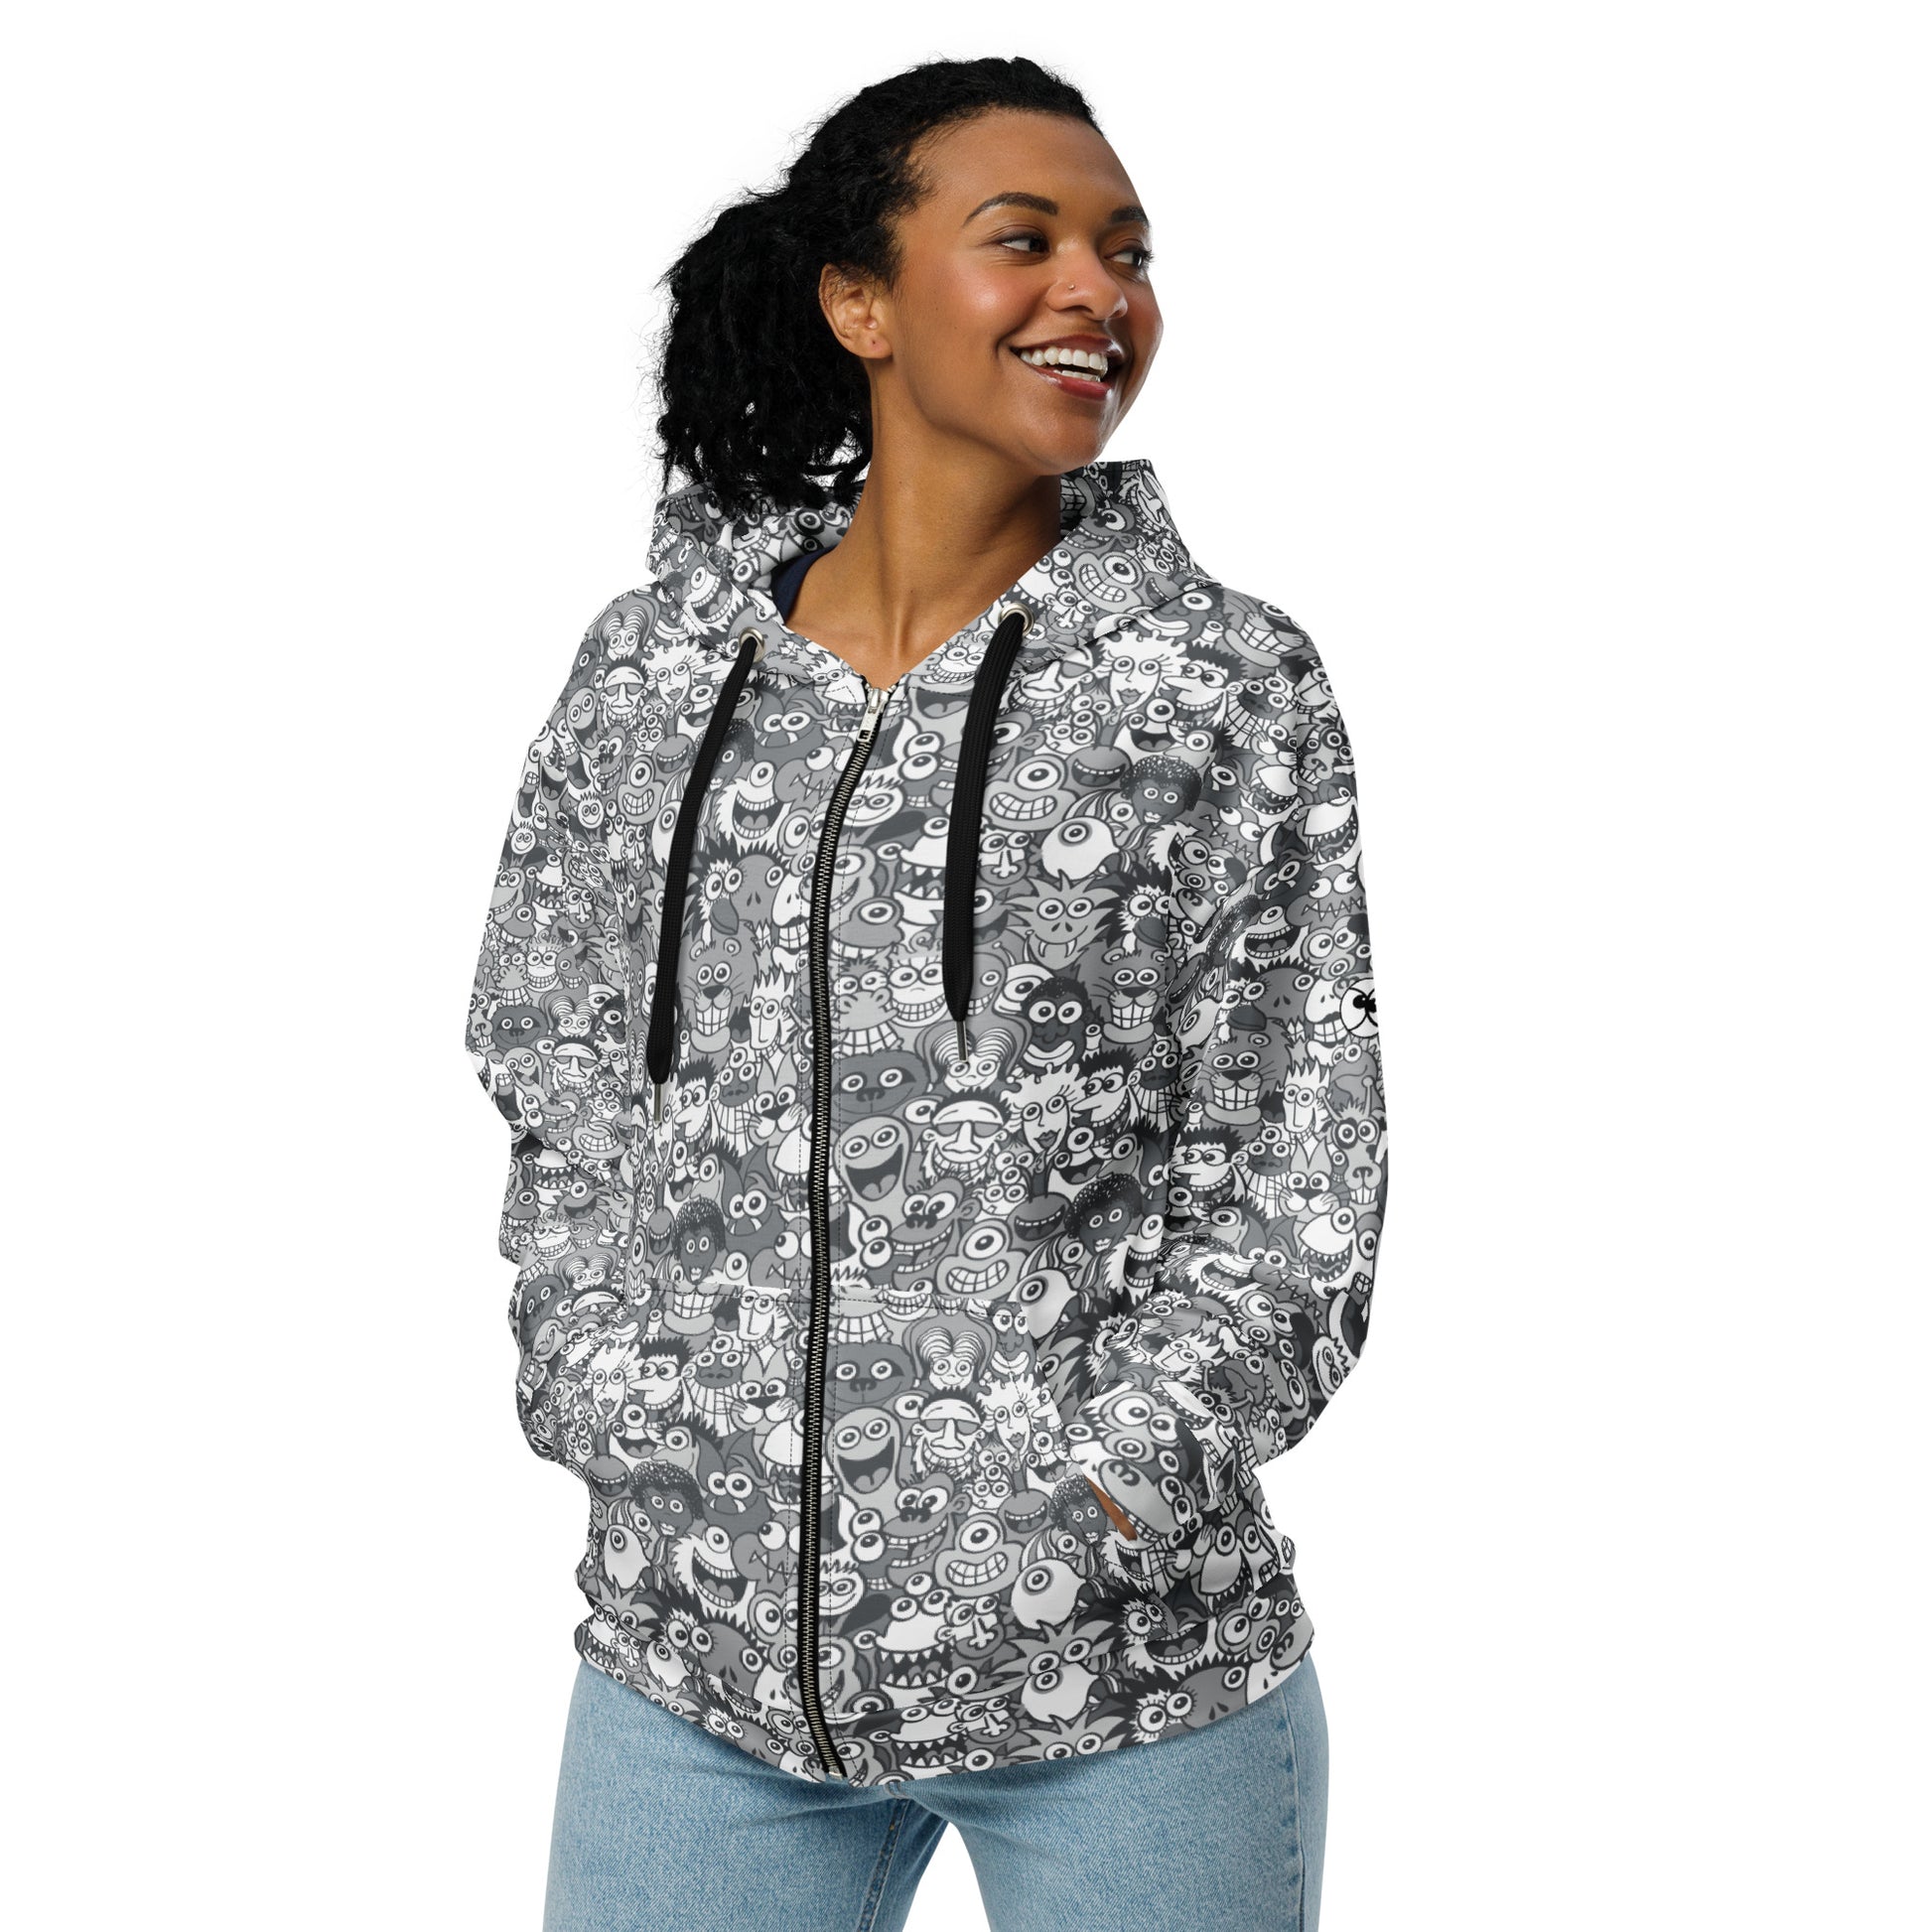 Find the gray man in the gray crowd of this gray world - Unisex zip hoodie. Lifestyle